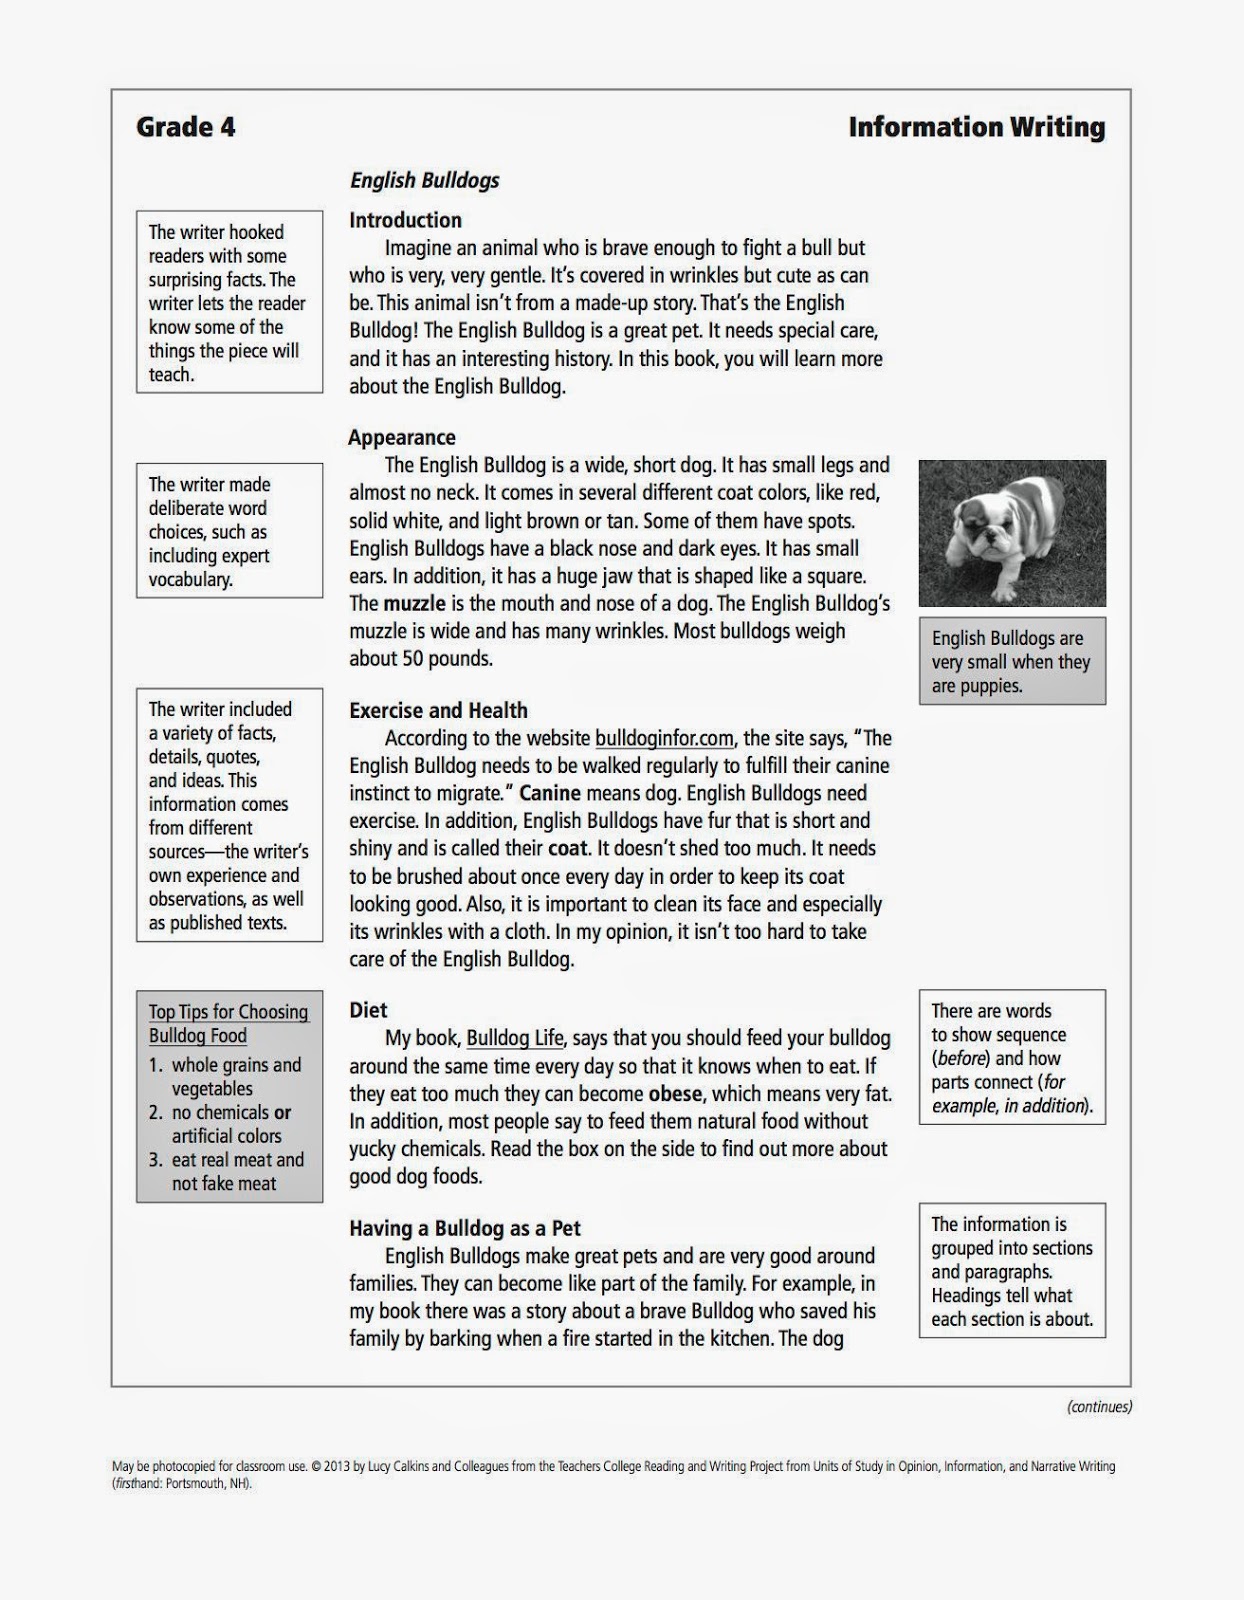 easTech: Design for Informational Writing